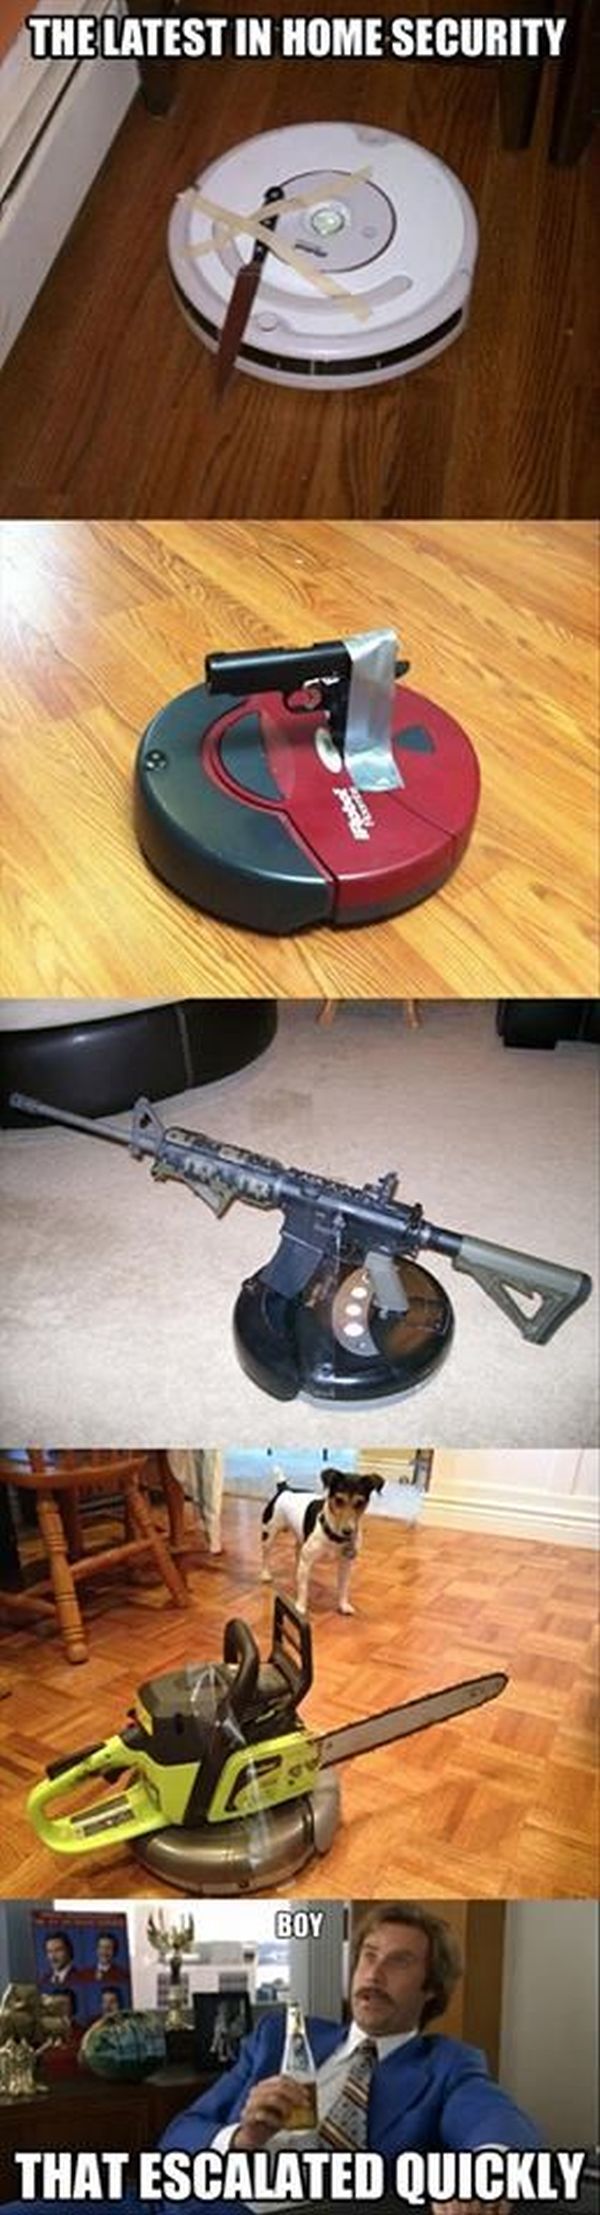 The Latest In Home Security